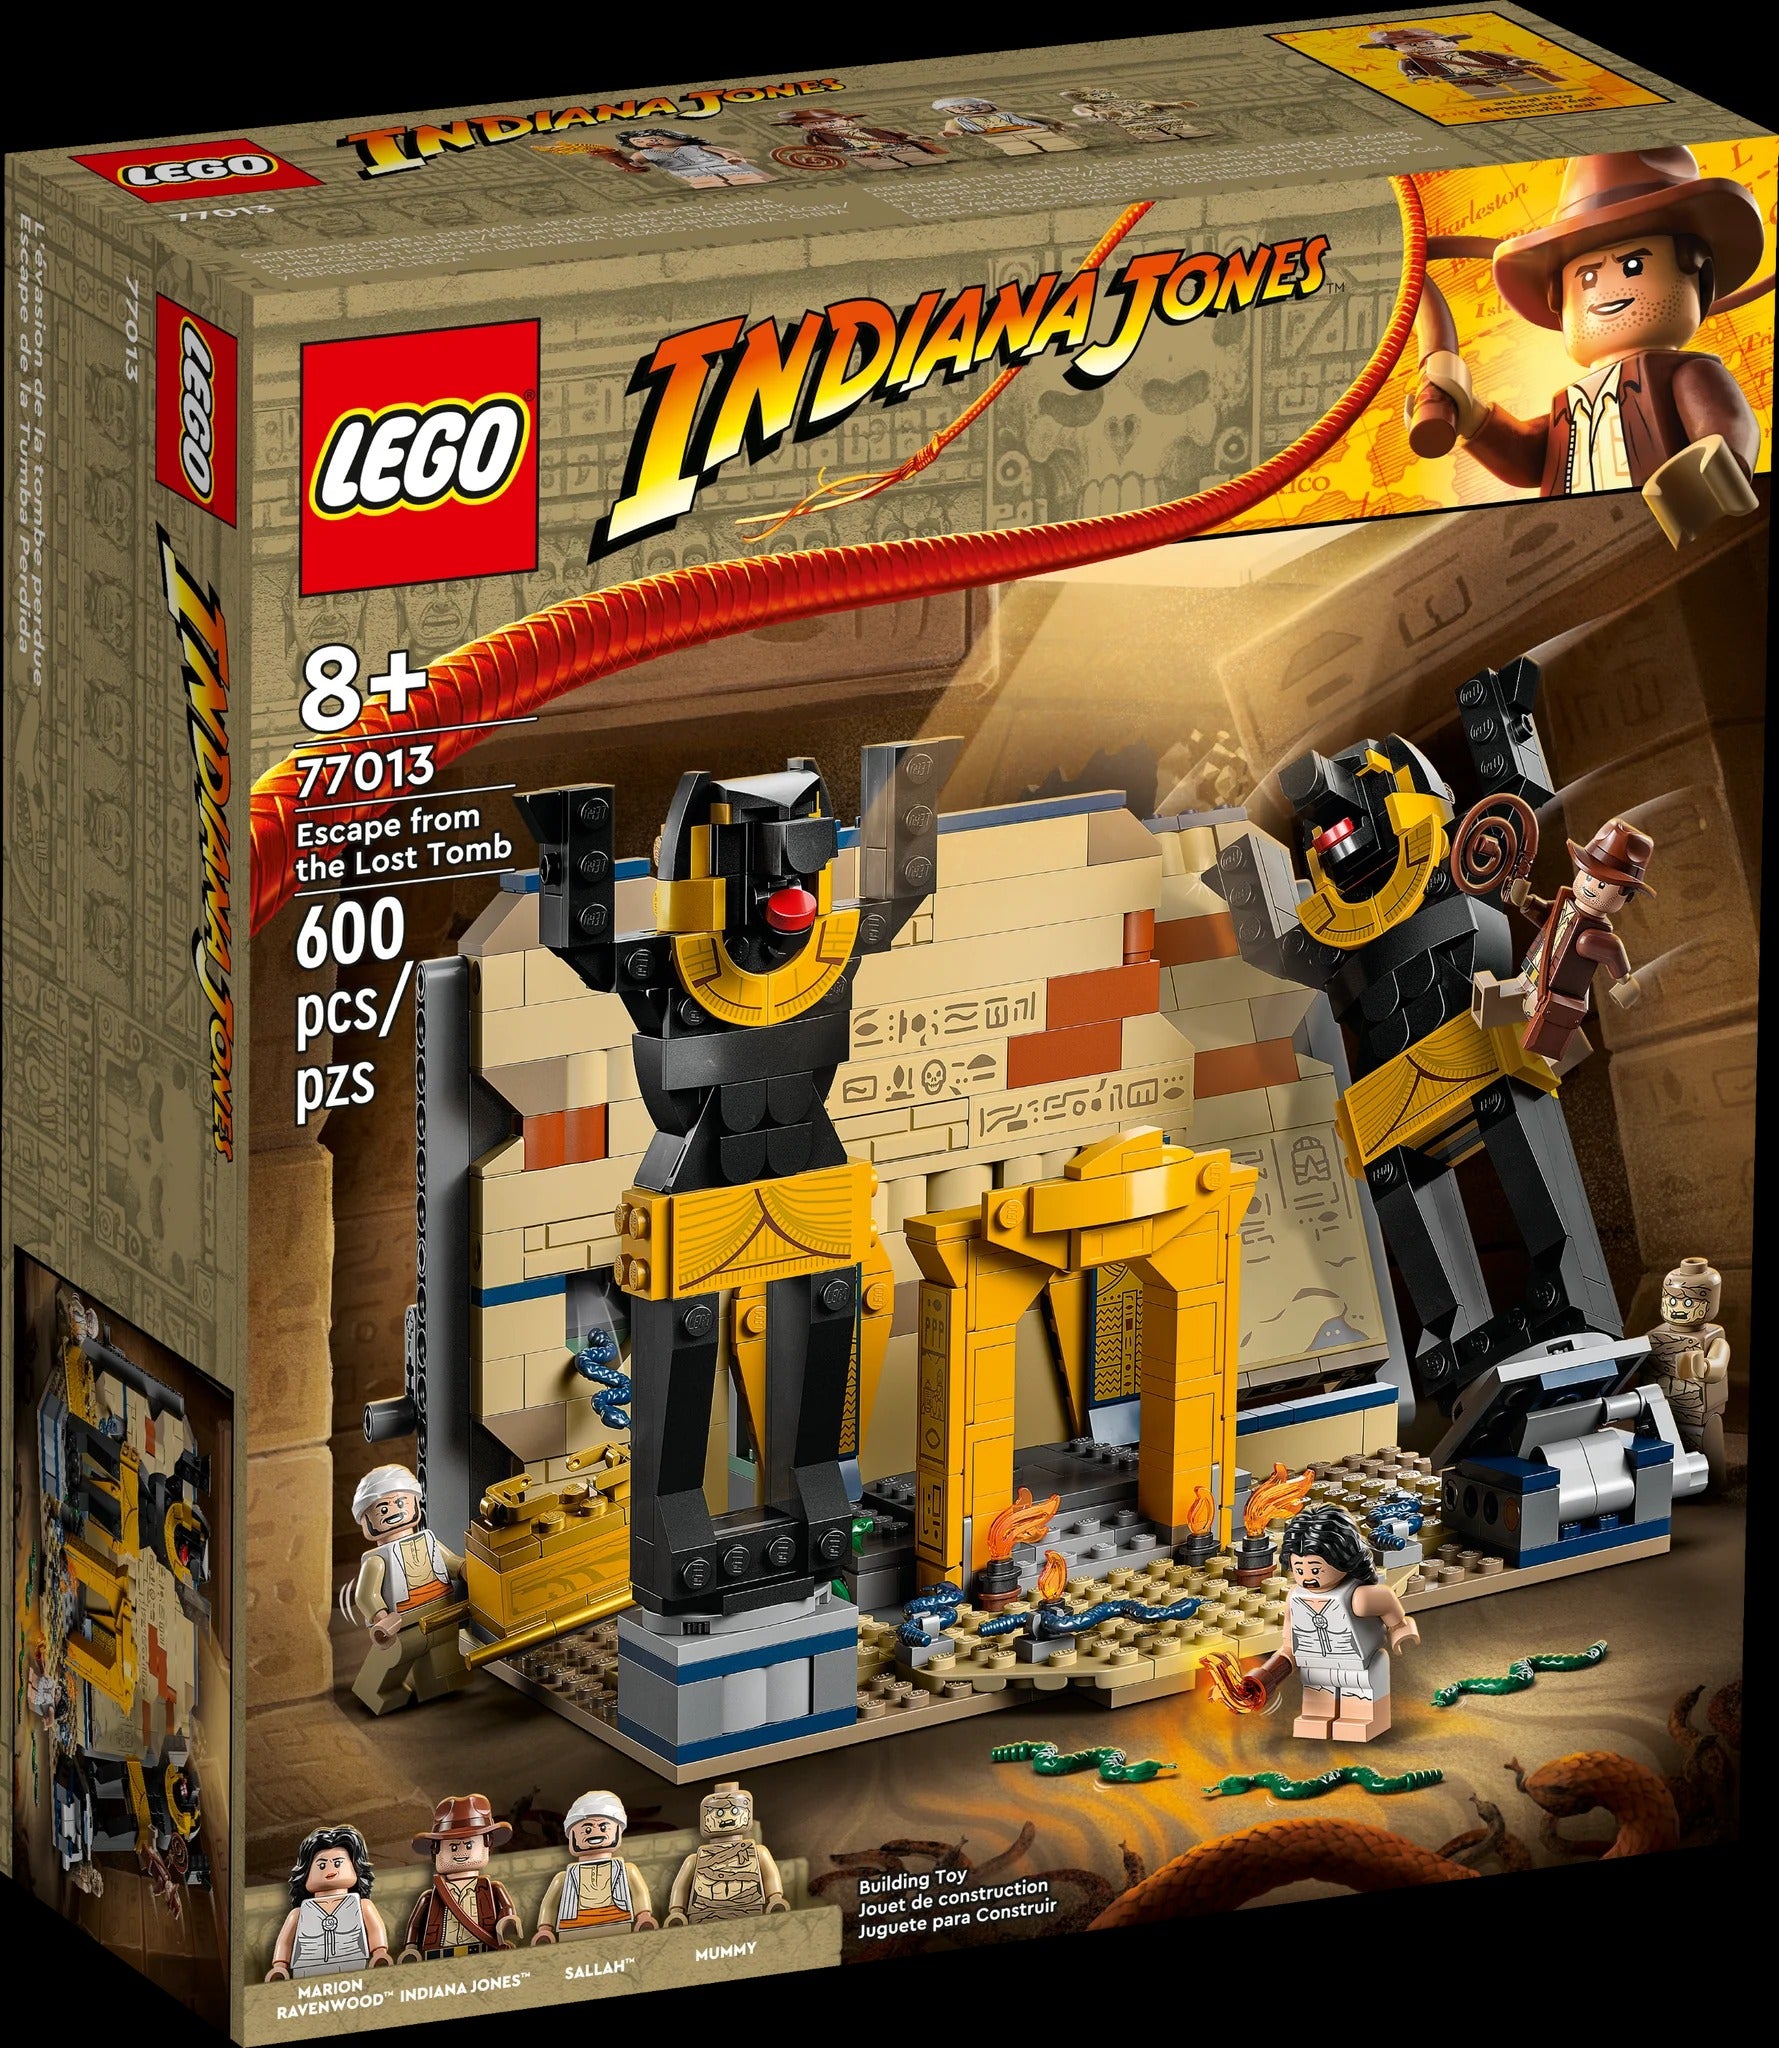 Lego: Indiana Jones - Escape from the Lost Tomb (77013)